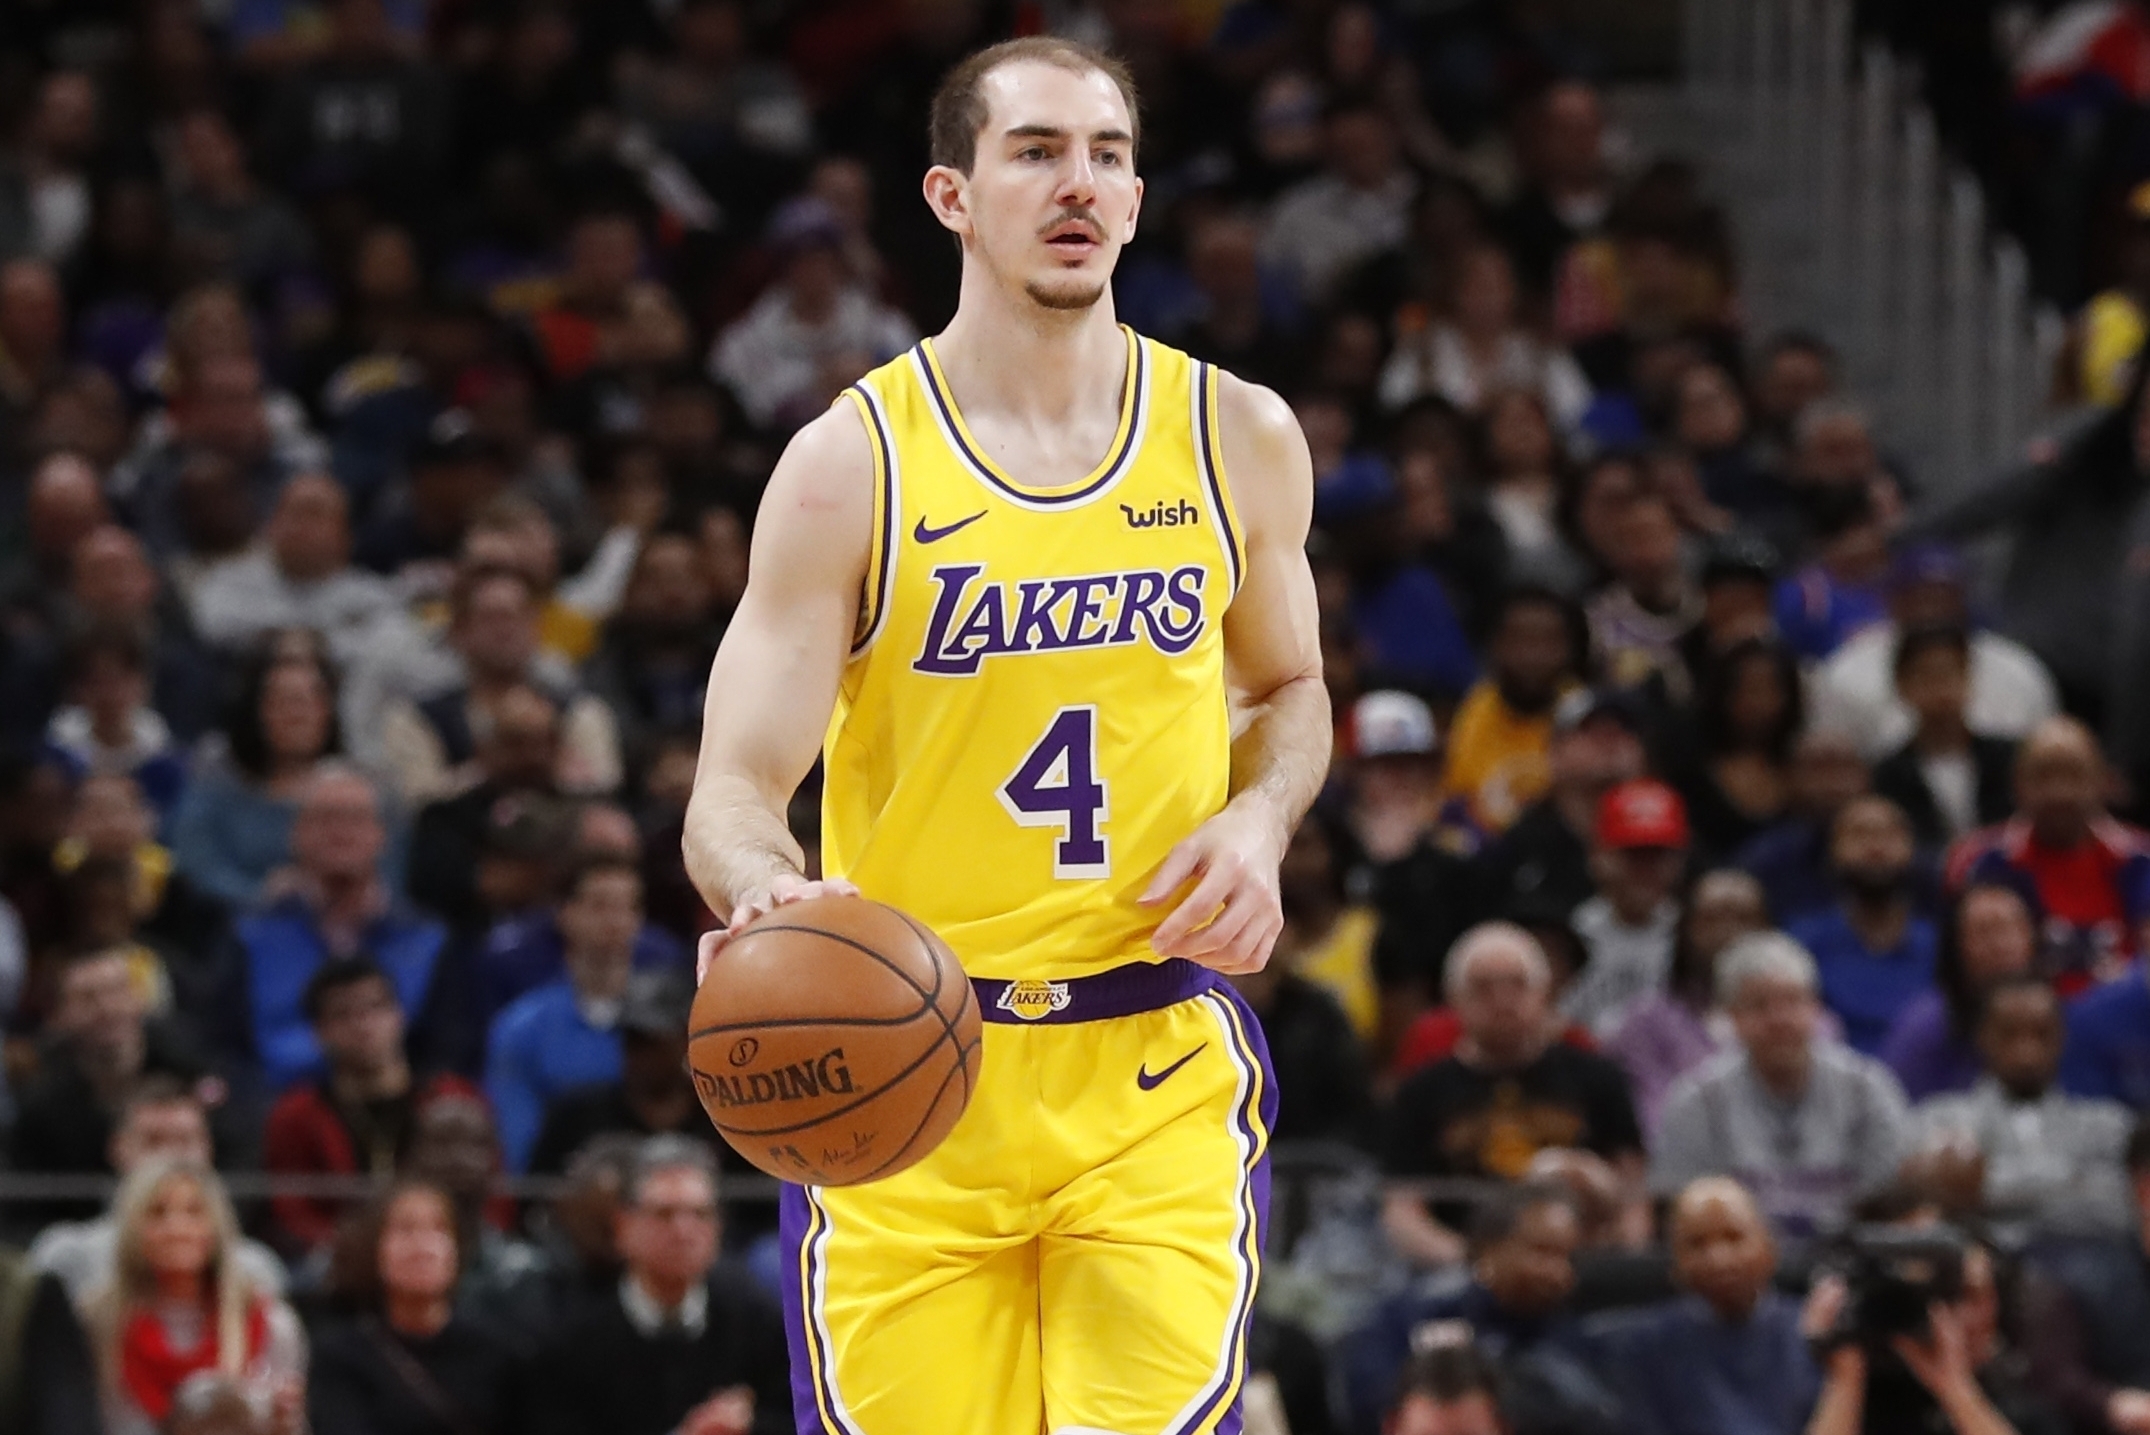 Lakers guard Alex Caruso gets multi-year shoe deal with ANTA